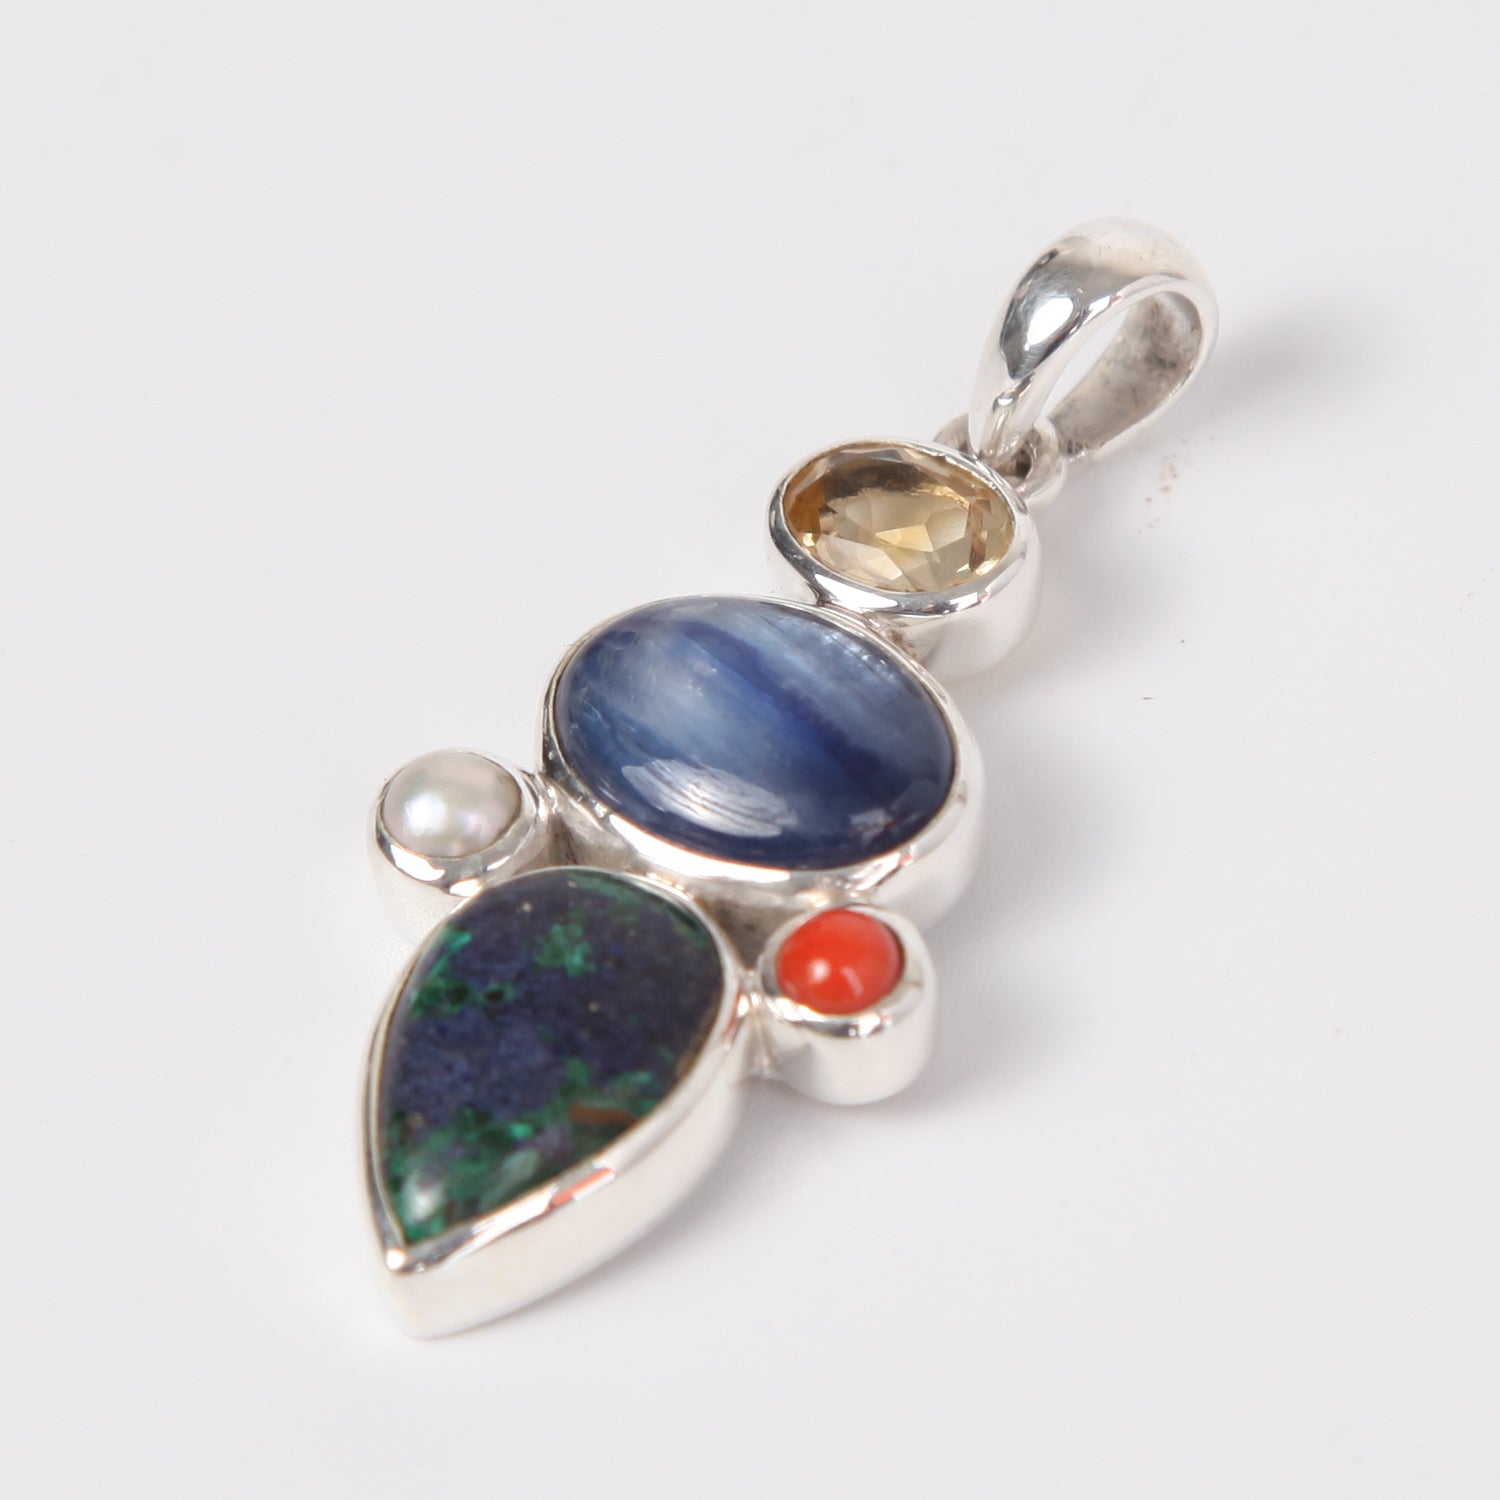 Azurite Malachite Sterling Silver Pendant with Red Coral